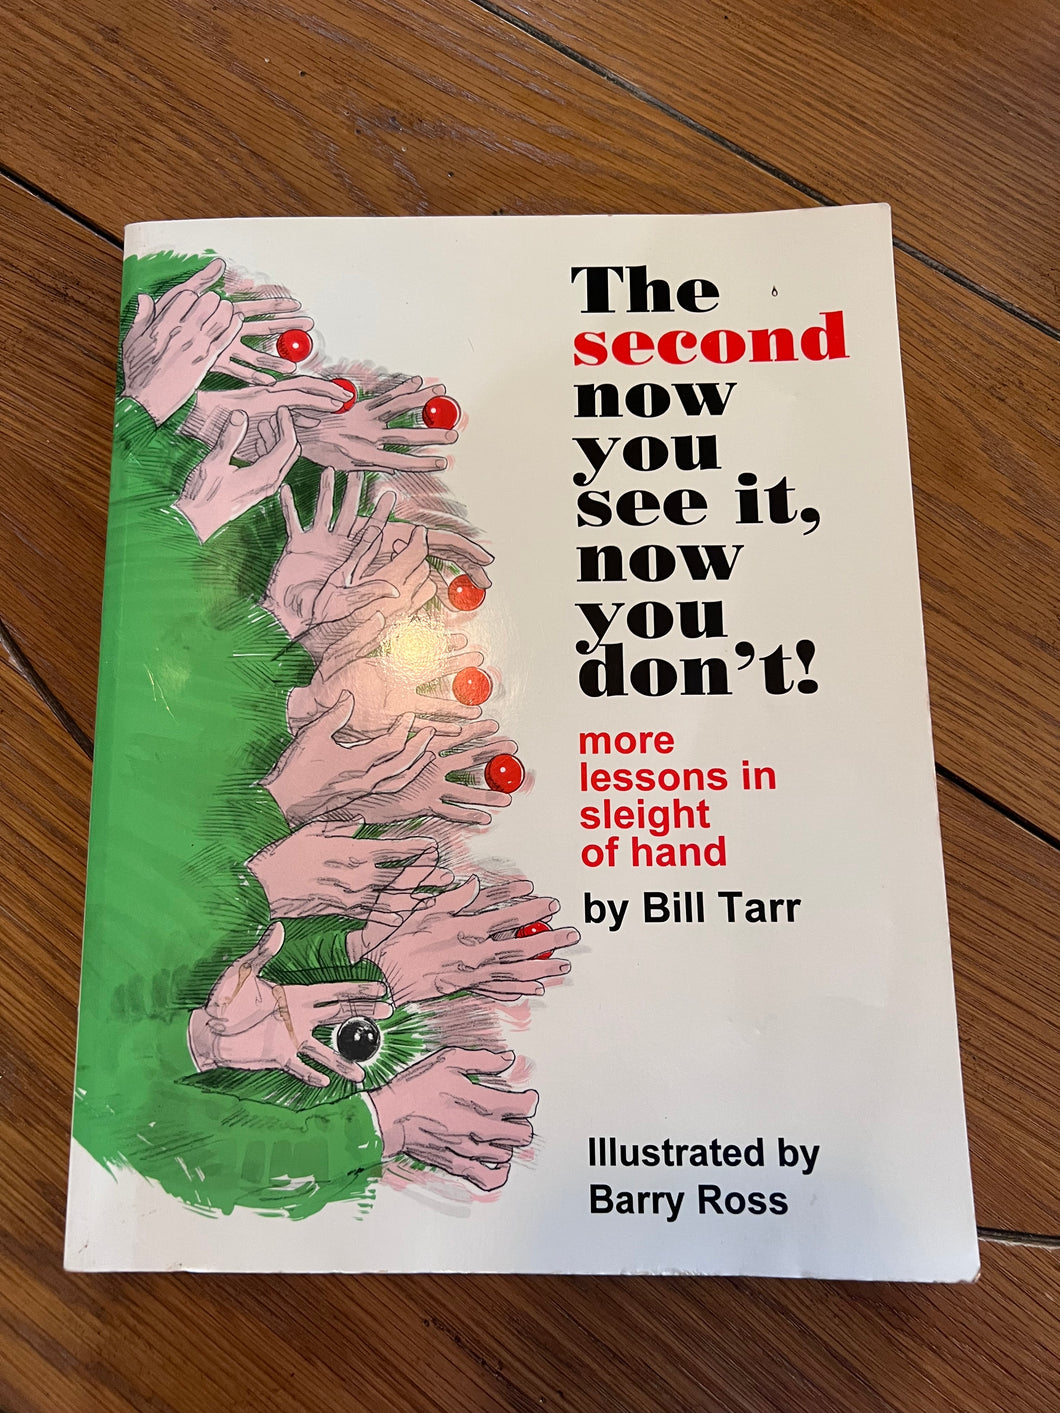 The Second Now You See It, Now You Don't!: Lessons in Sleight of Hand by Bill Tarr